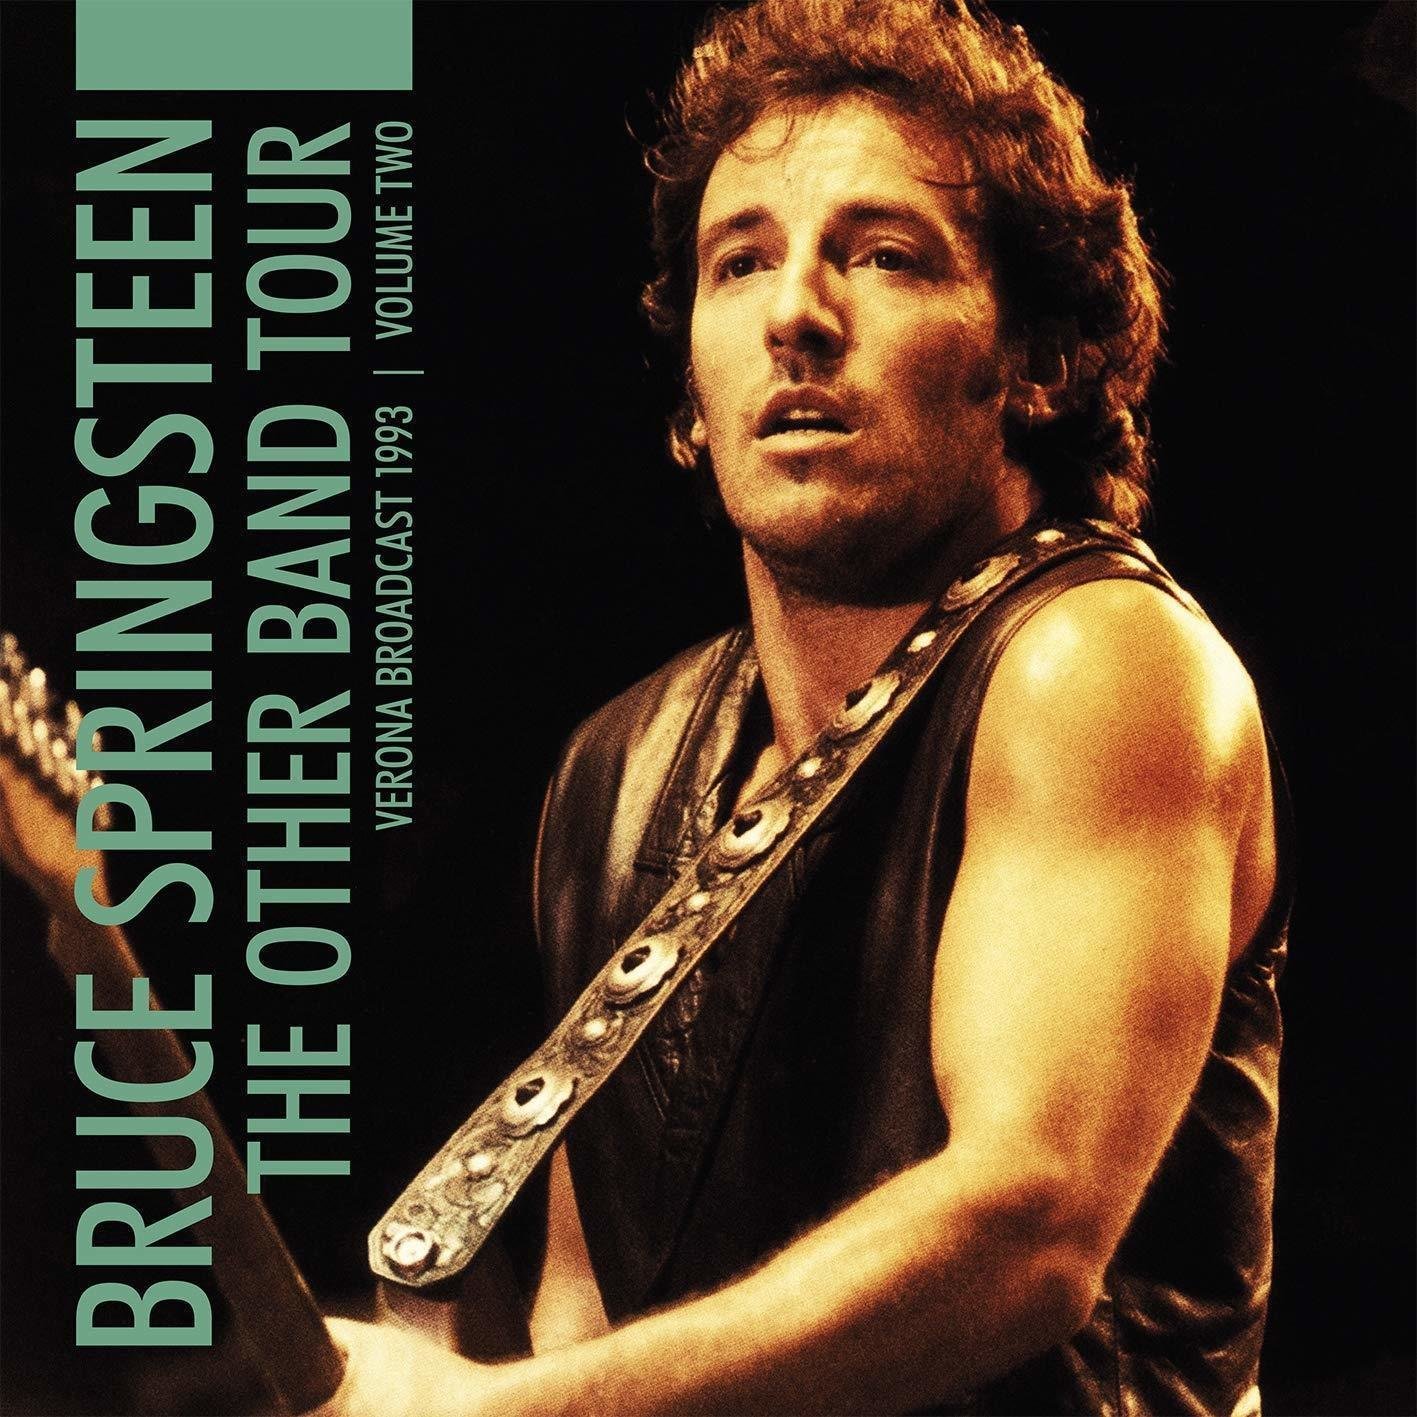 Vinyl Record Bruce Springsteen - The Other Band Tour - Verona Broadcast 1993 - Volume Two (2 LP)